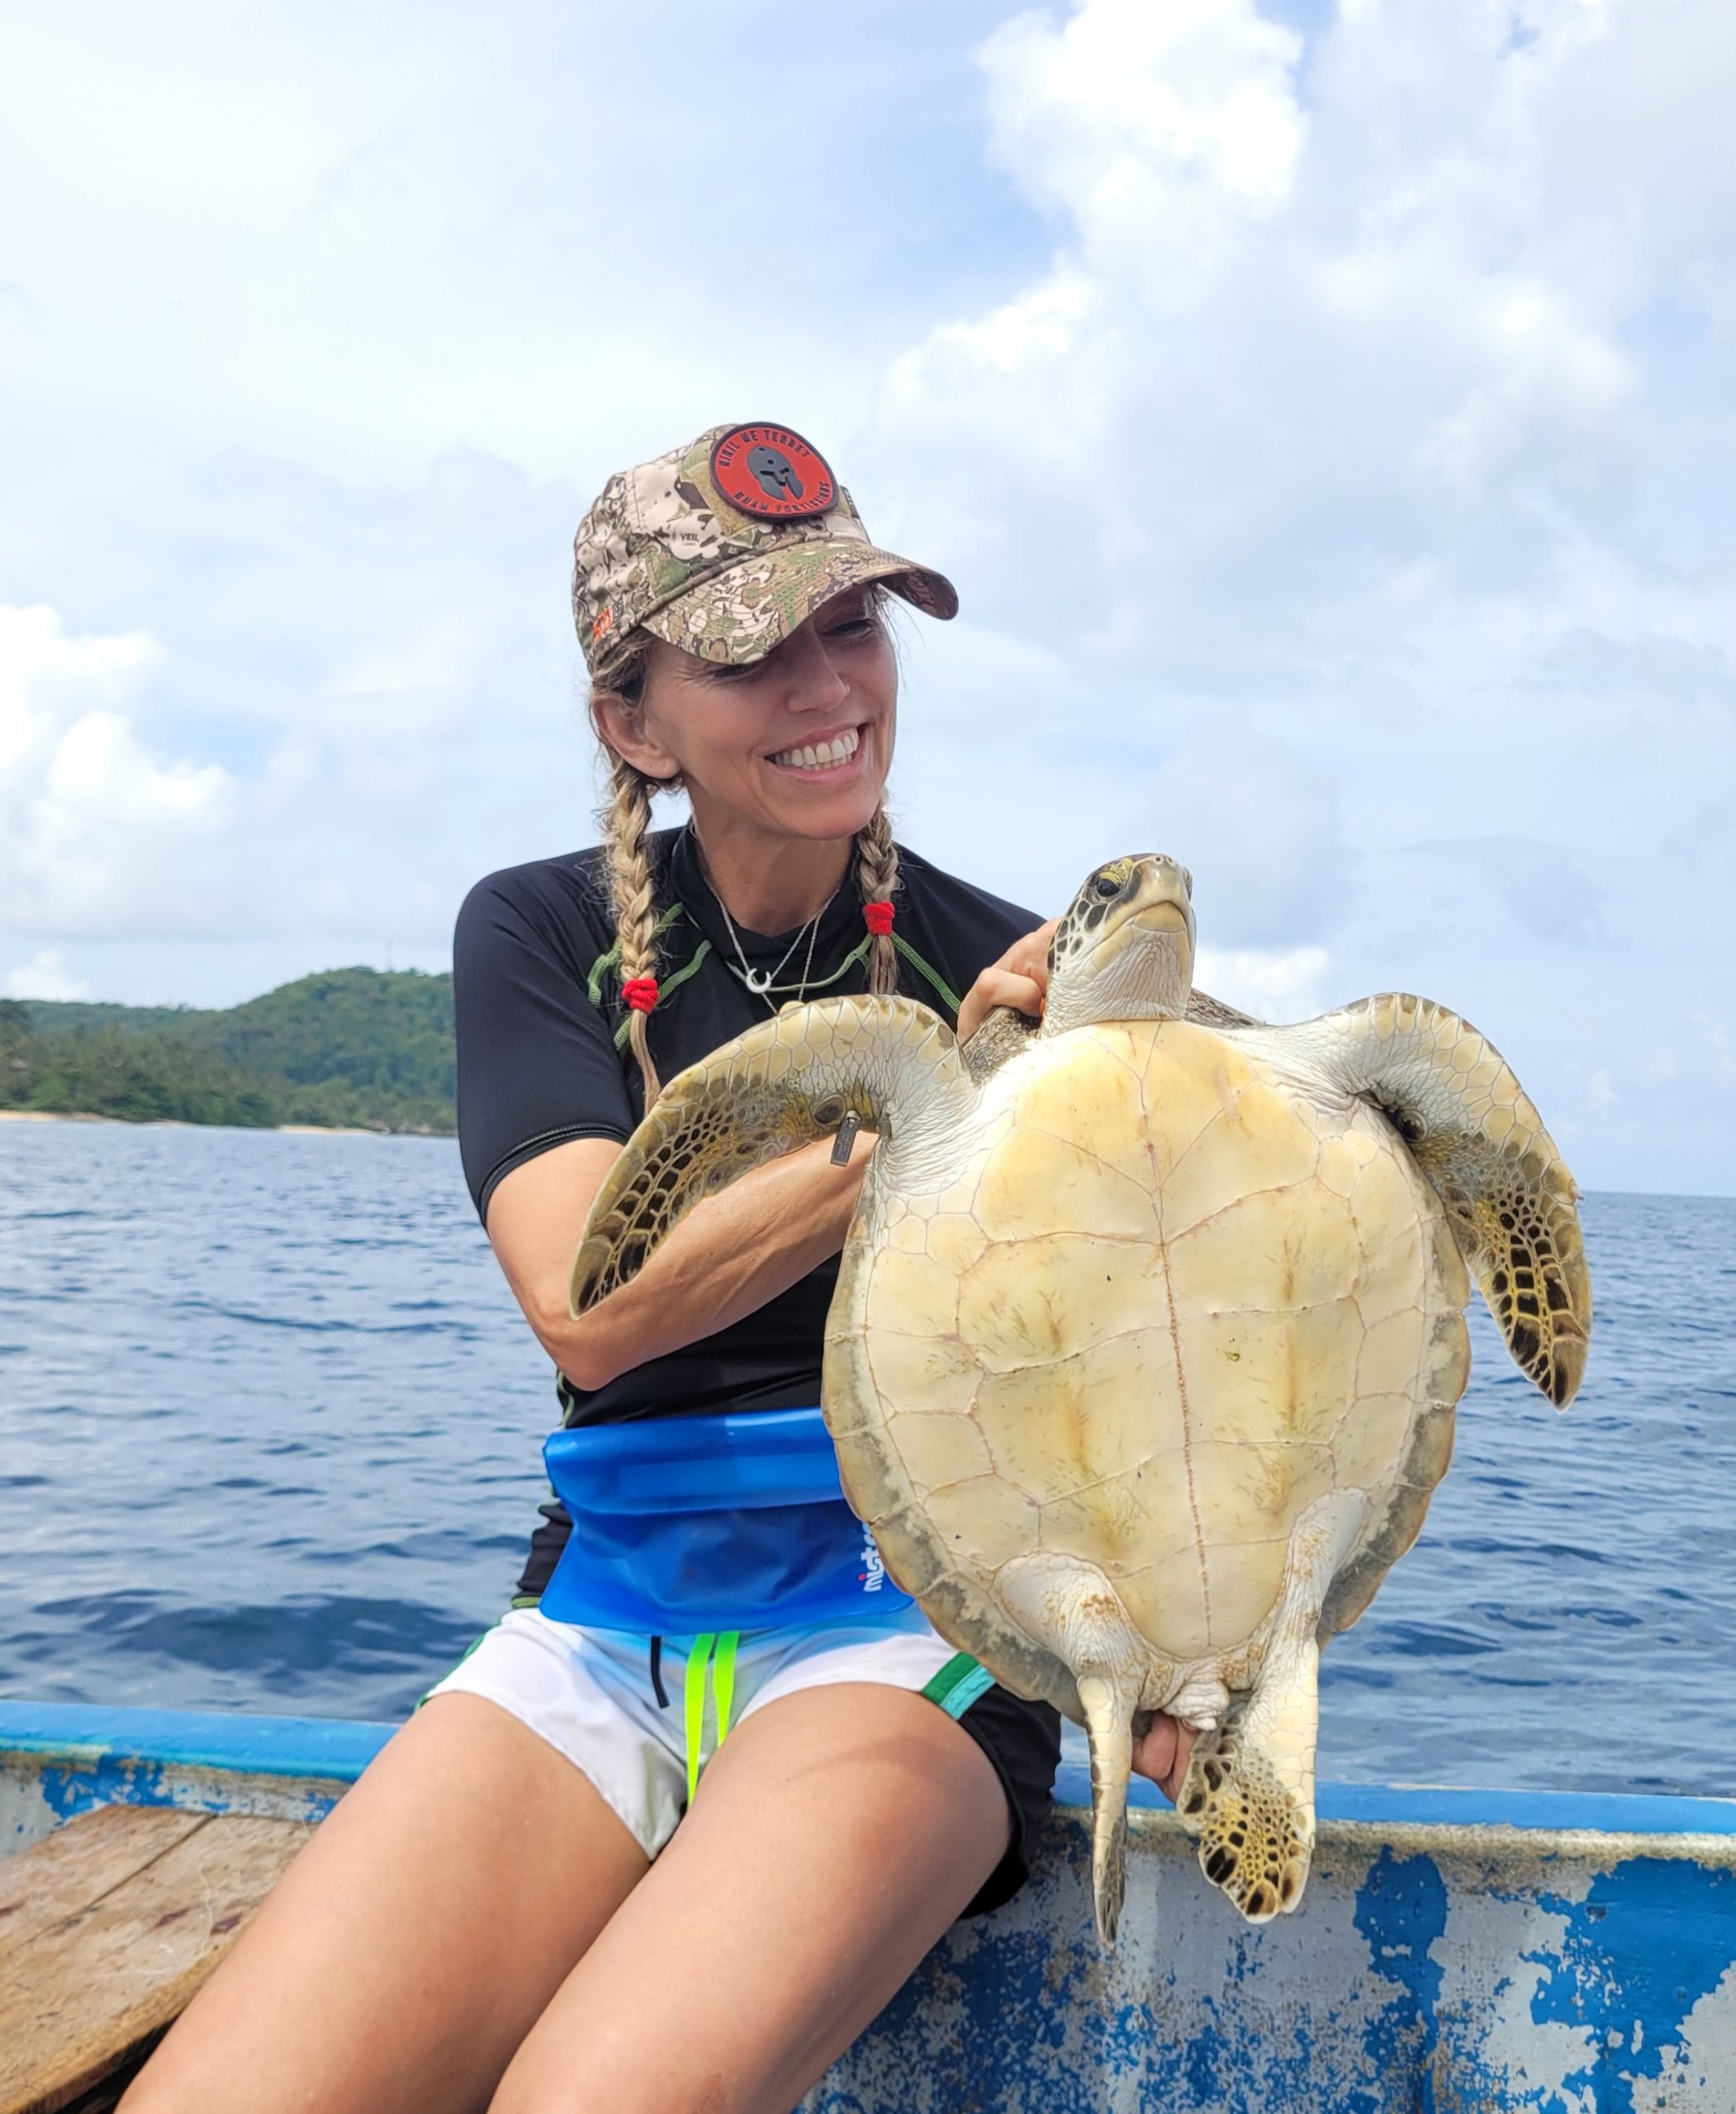 A Dream Come True: My Journey to Africa as a Sea Turtle Conservation Volunteer